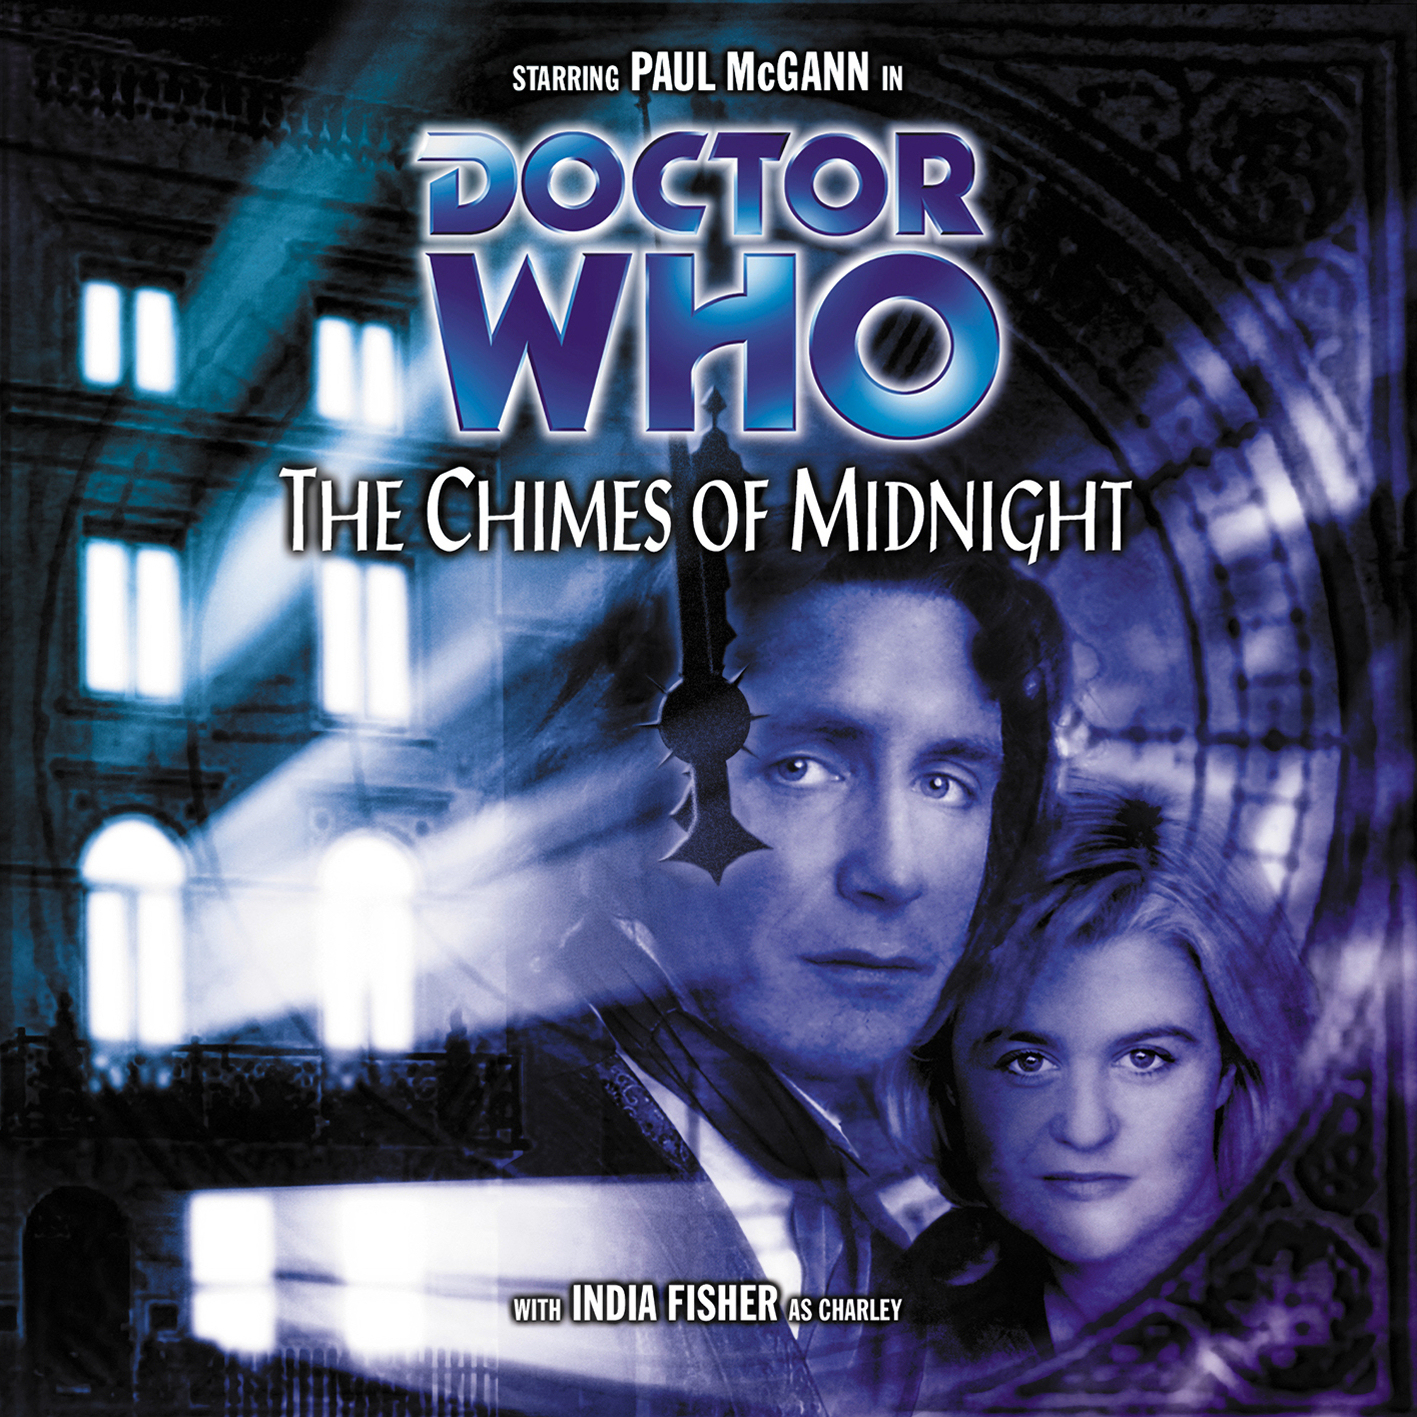 Cover image for The Chimes of Midnight: the Eighth Doctor and Charley Pollard (India Fisher)'s faces superimposed on a faint clock face pointing to nearly midnight. Also visible is a large English manor house with light from its windows. The image is dark blue/black in tone. Text reads: Starring Paul McGann in DOCTOR WHO; The Chimes of Midnight; with India Fisher as Charley'.